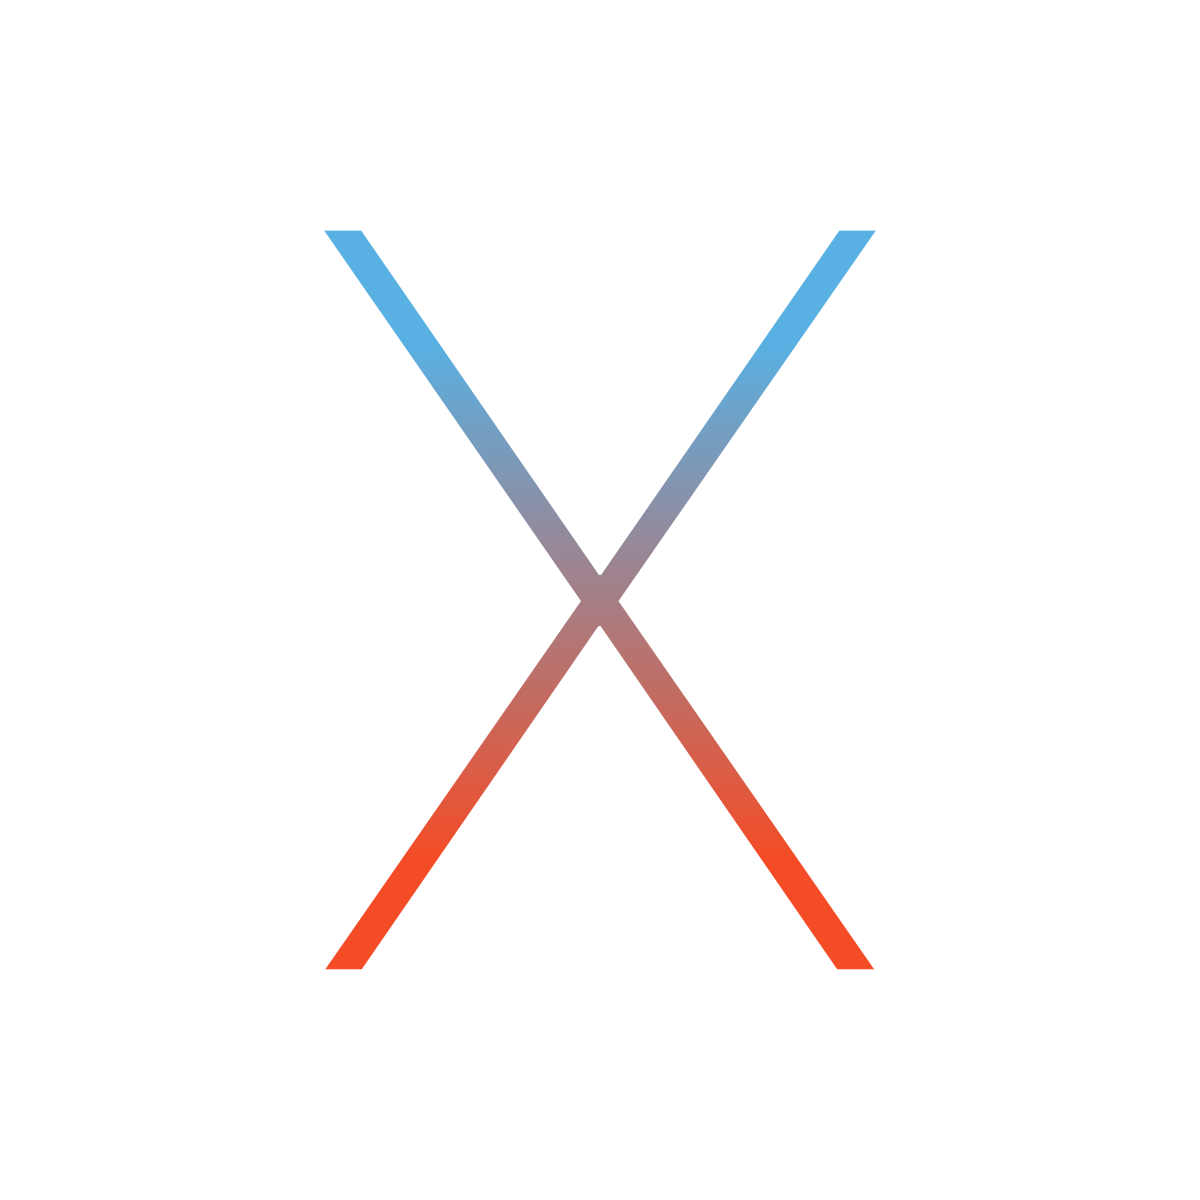 How to download mac os x yosemite without app store